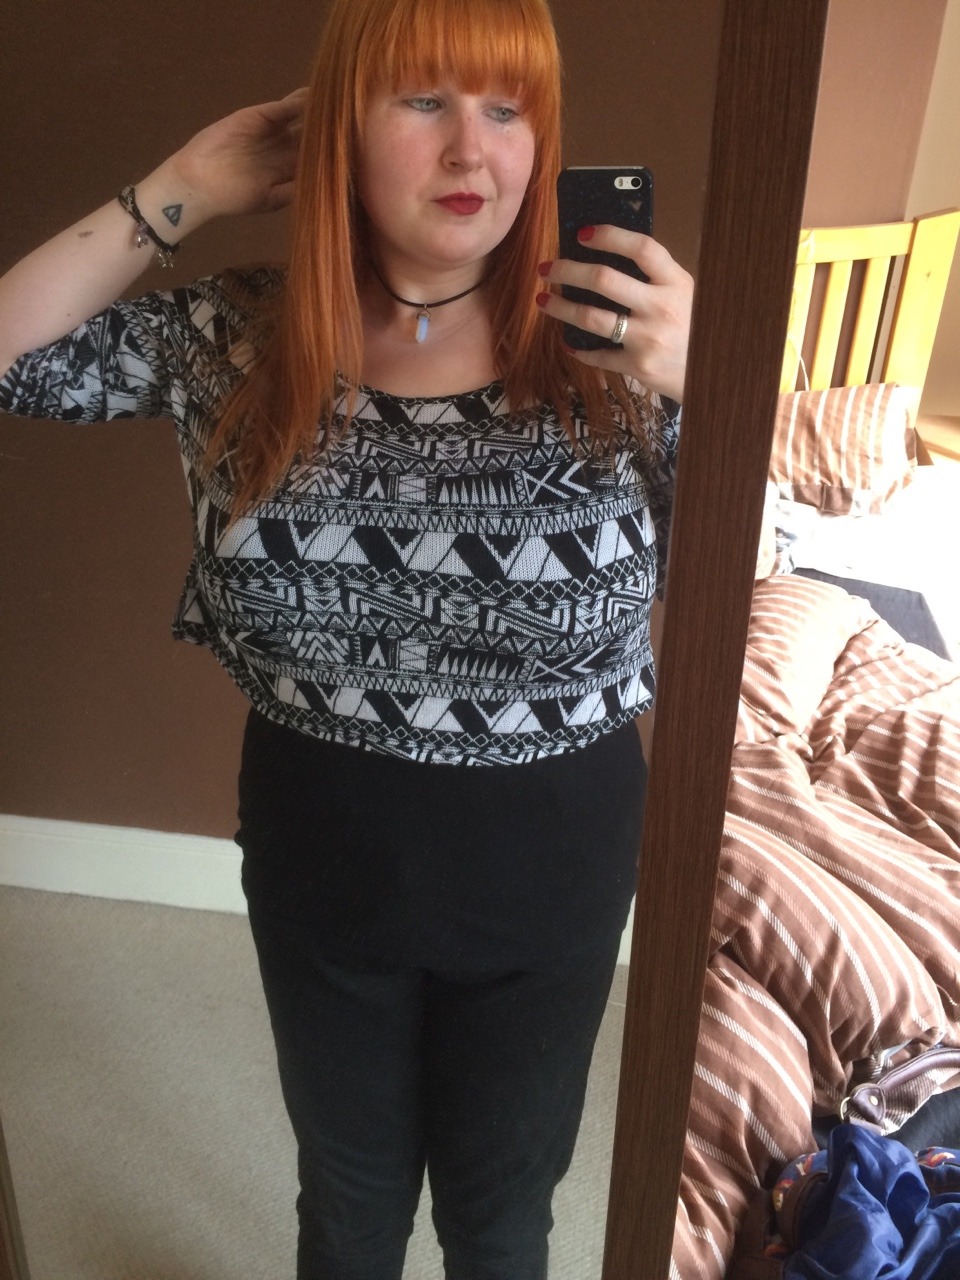 foxybaggins:  Time to head to my interview. Even if it’s a wasted trip, at least